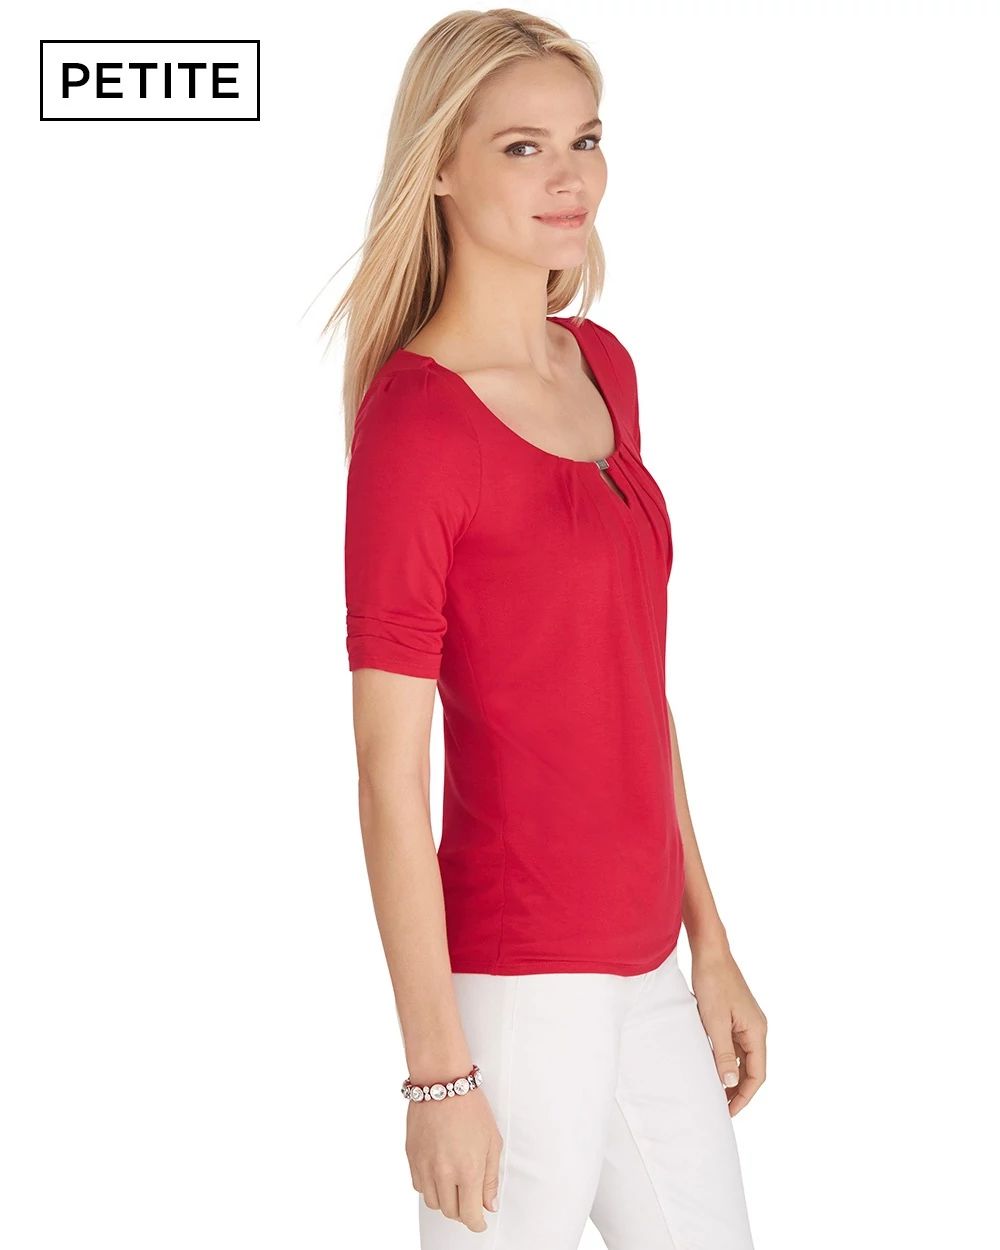 Petite The Modern Elbow Sleeve Pleated Keyhole Tee click to view larger image.